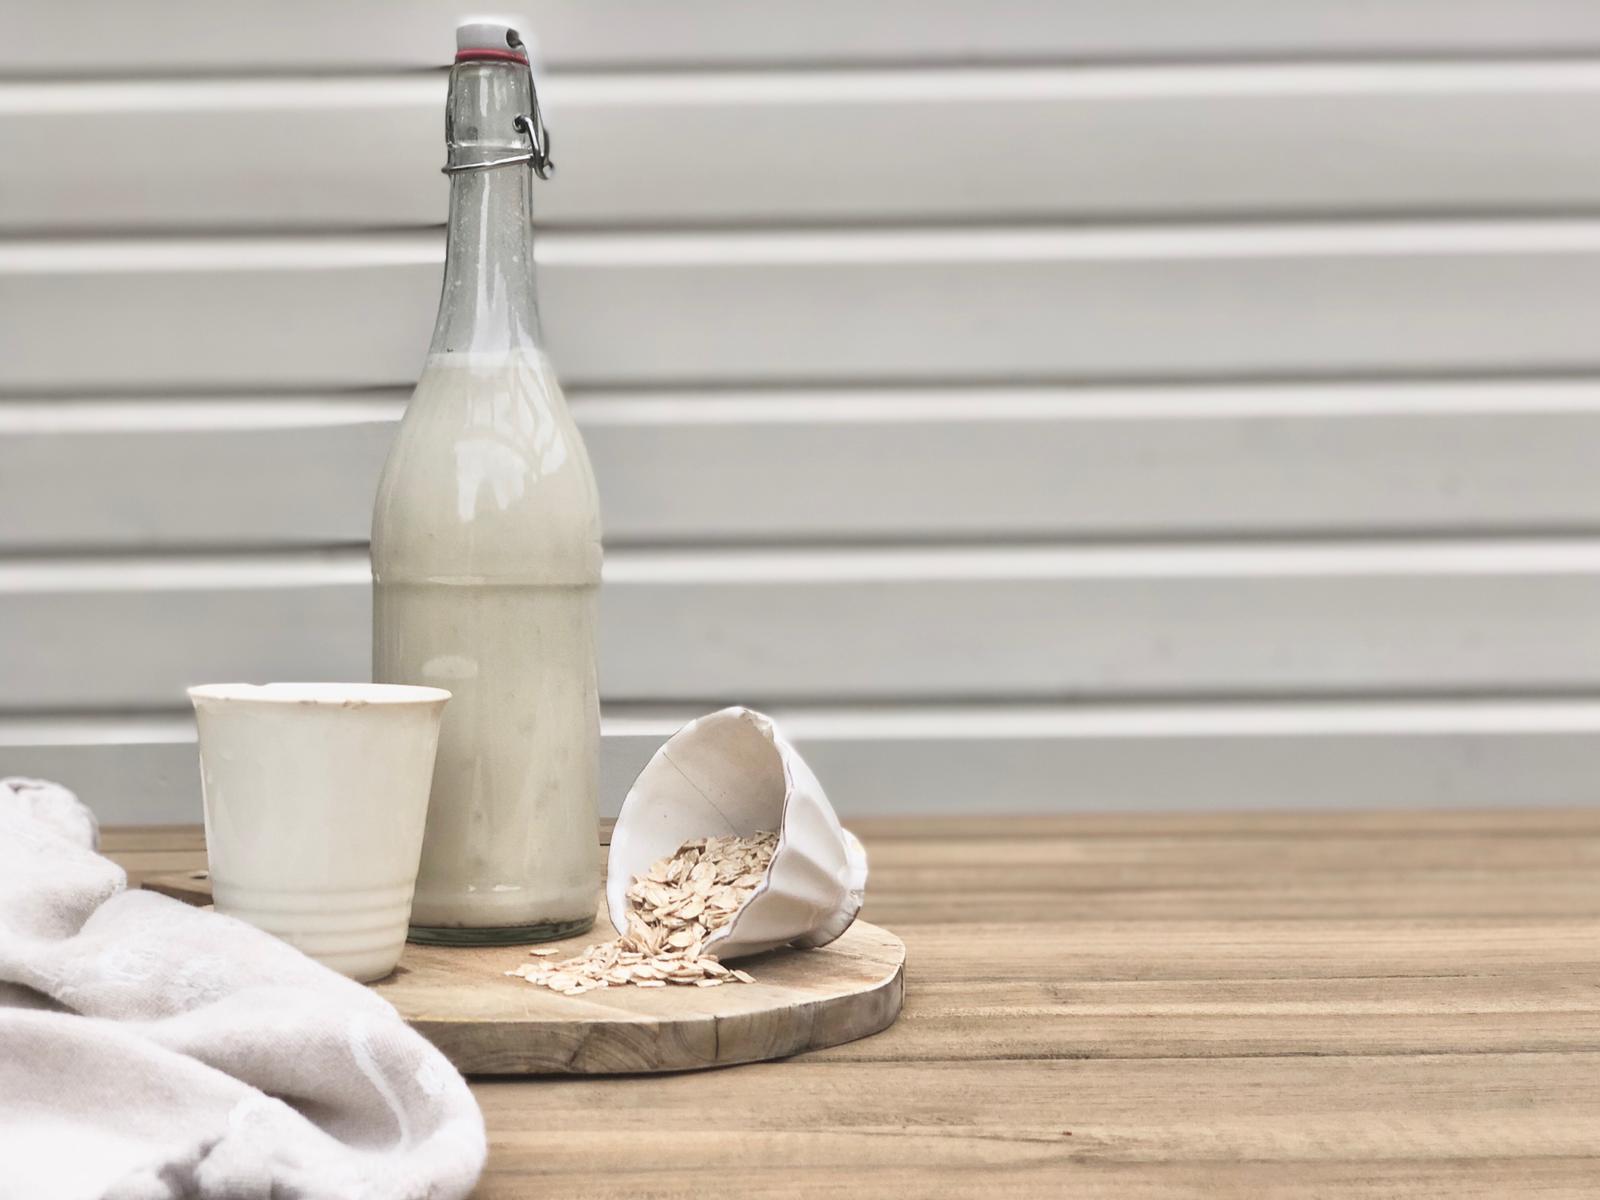 Easy recipe to make your own oat milk